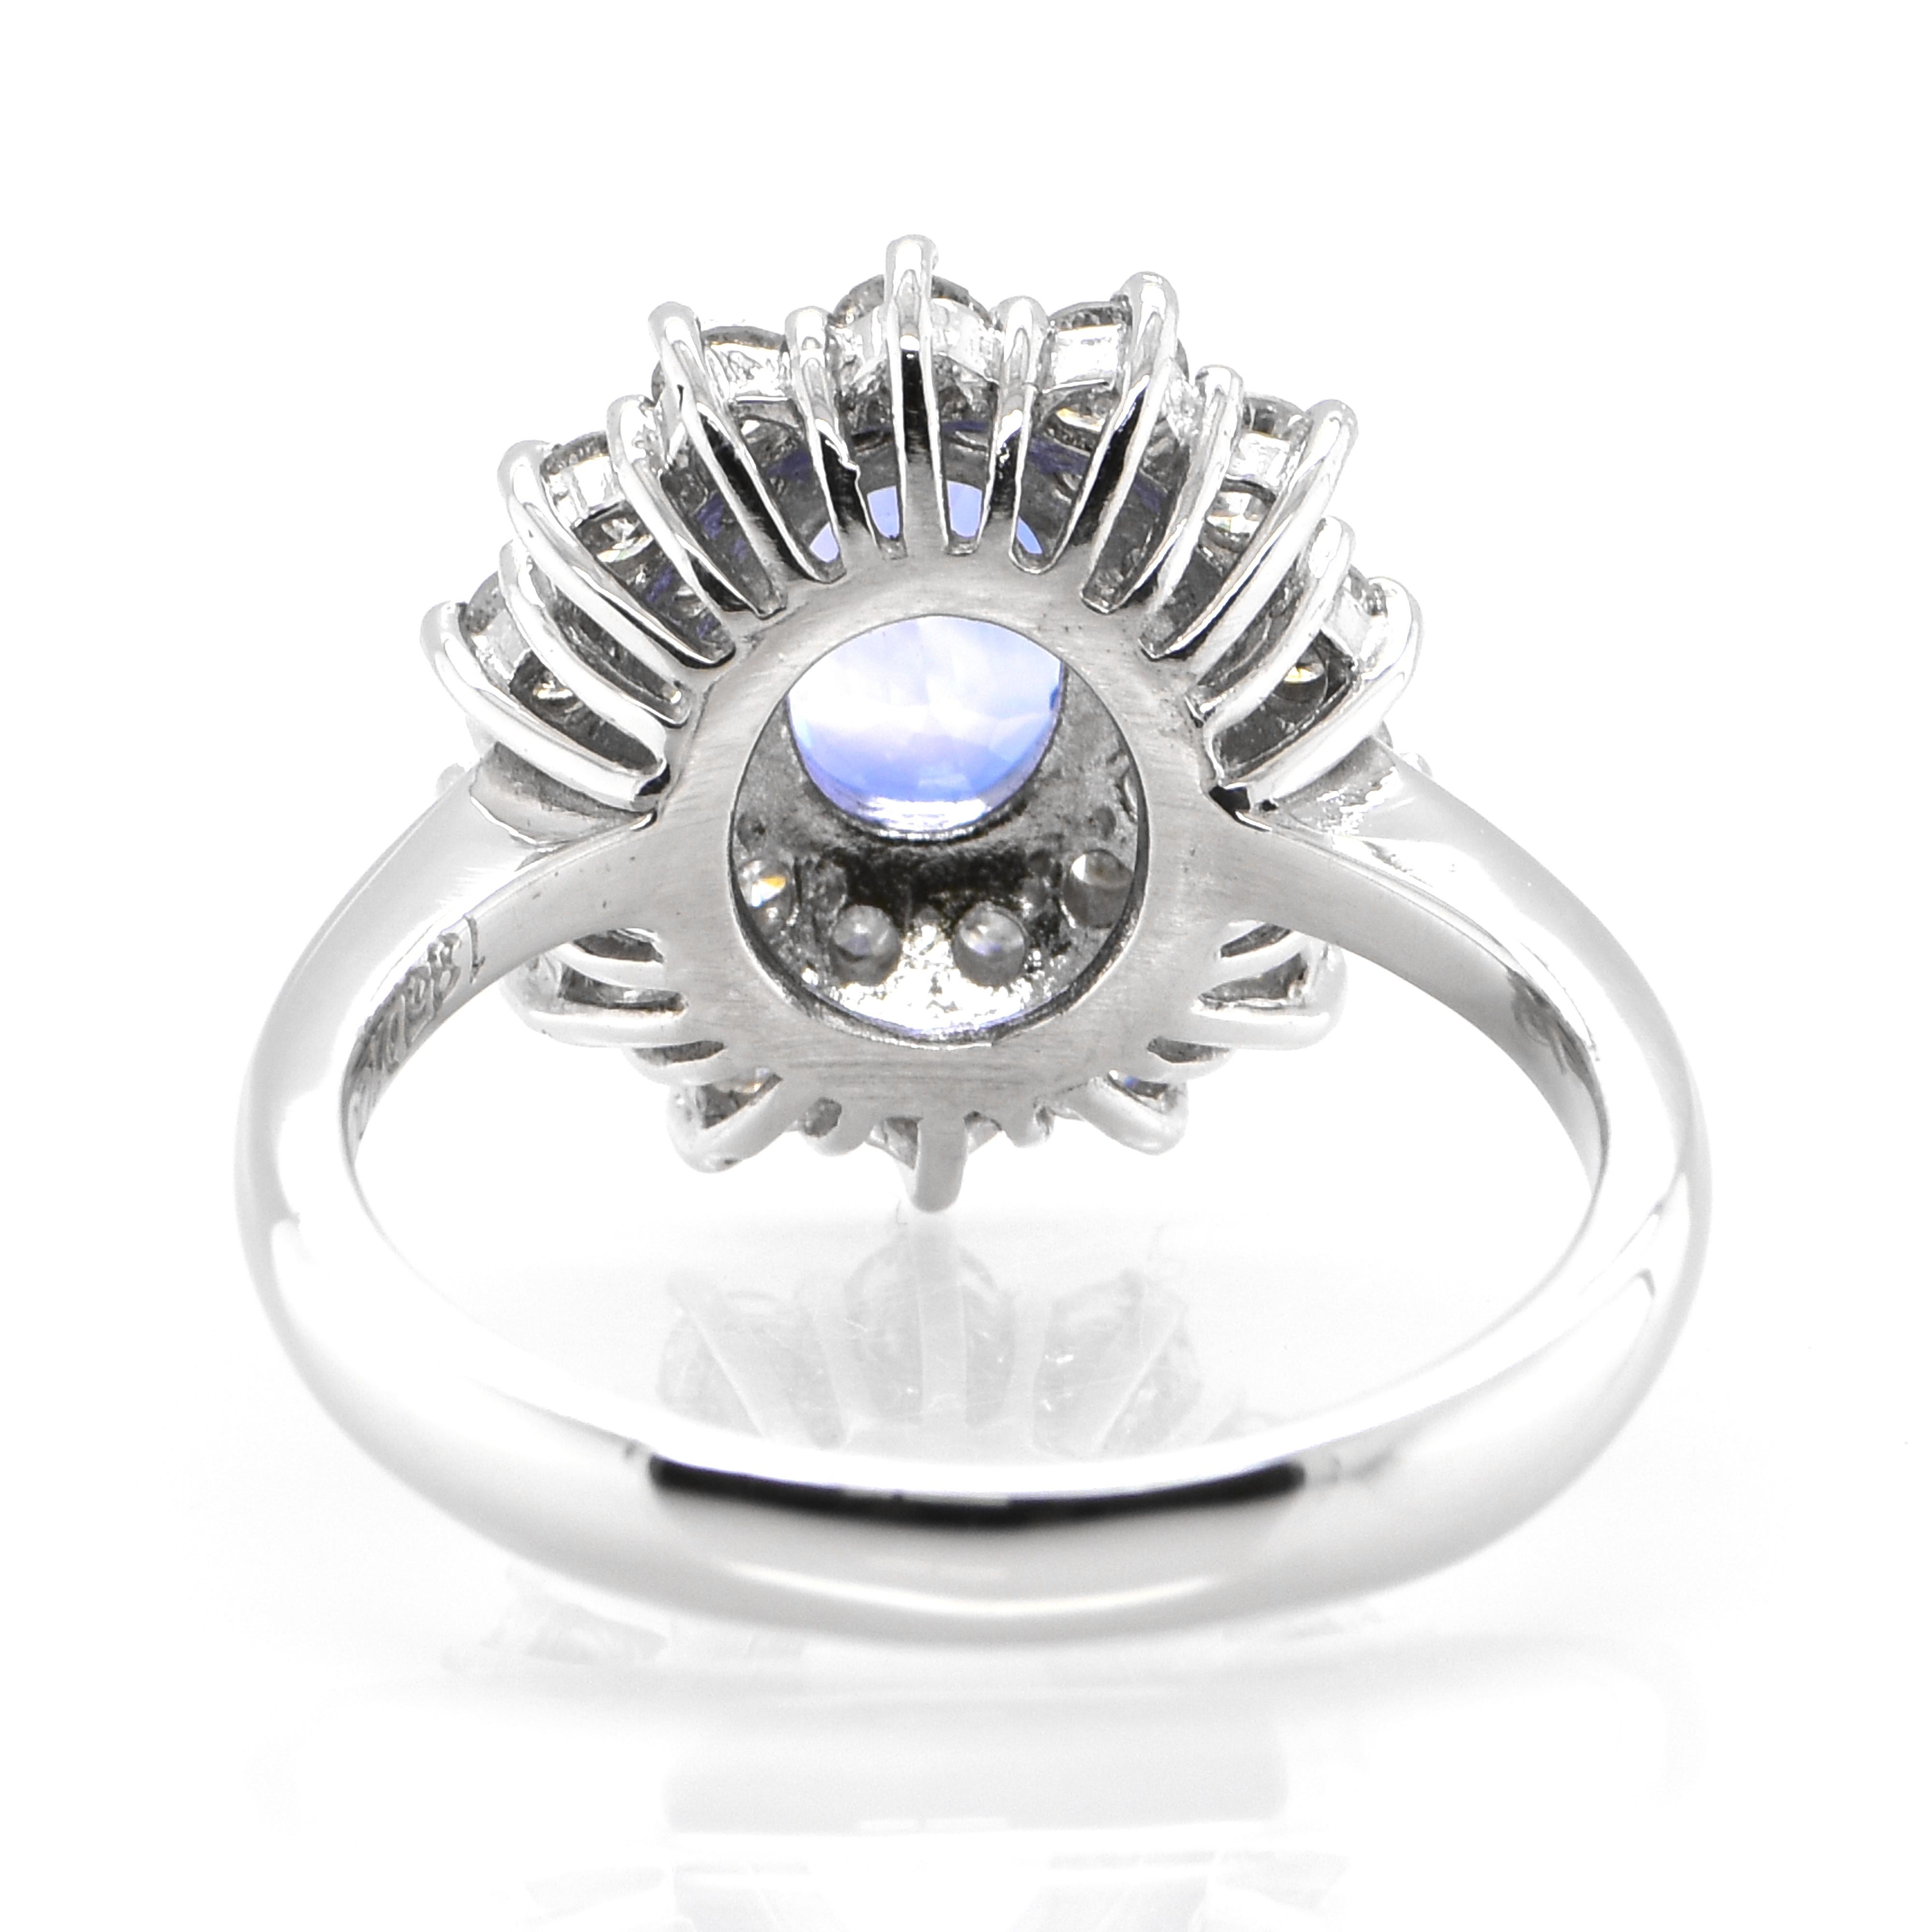 Women's 1.35 Carat Natural 'Cornflower Blue' Sapphire and Diamond Made in Platinum For Sale